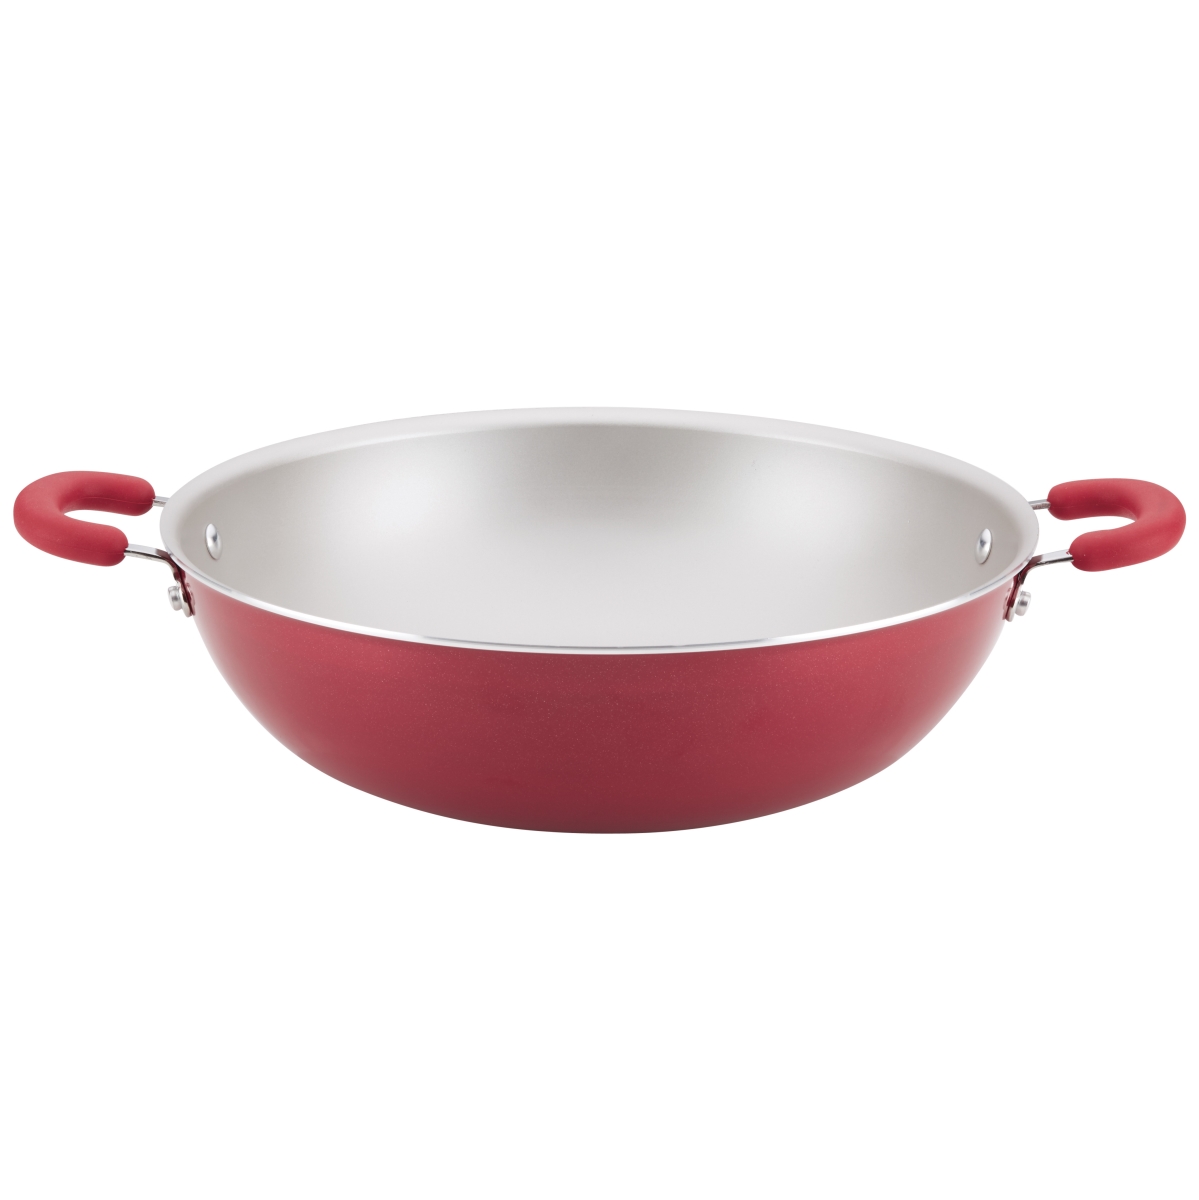 Rachael Ray 12161 14.25 in. Create Delicious Aluminum Nonstick Wok - Red Shimmer